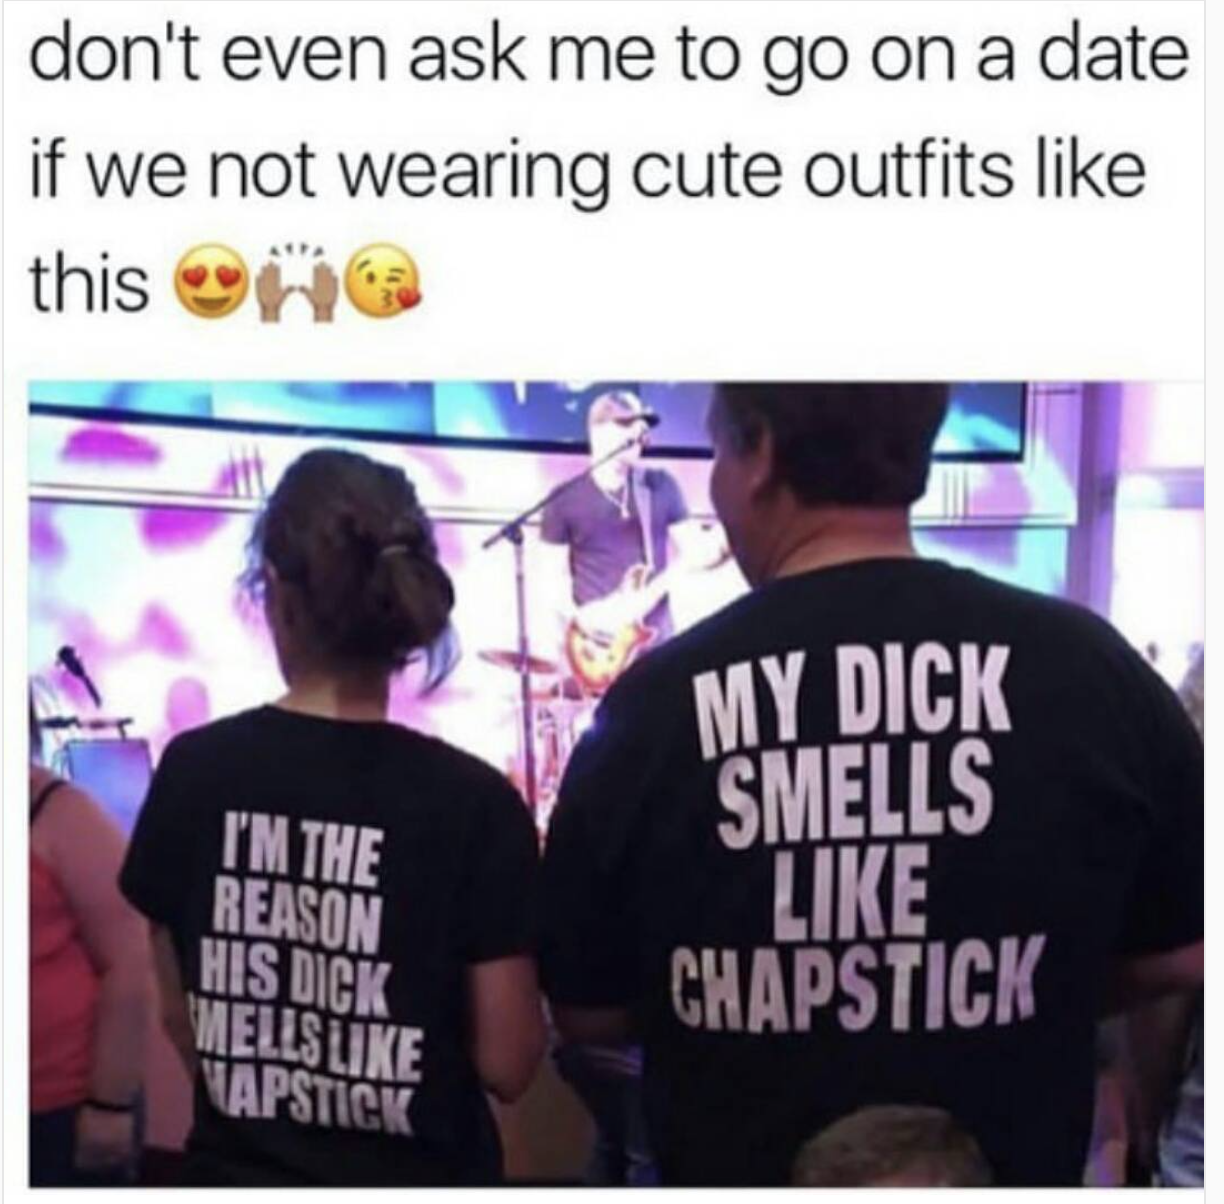 love my boyfriend meme - don't even ask me to go on a date if we not wearing cute outfits this 6 My Dick Smells I'M The Reason His Dick Mells Napstick Chapstick